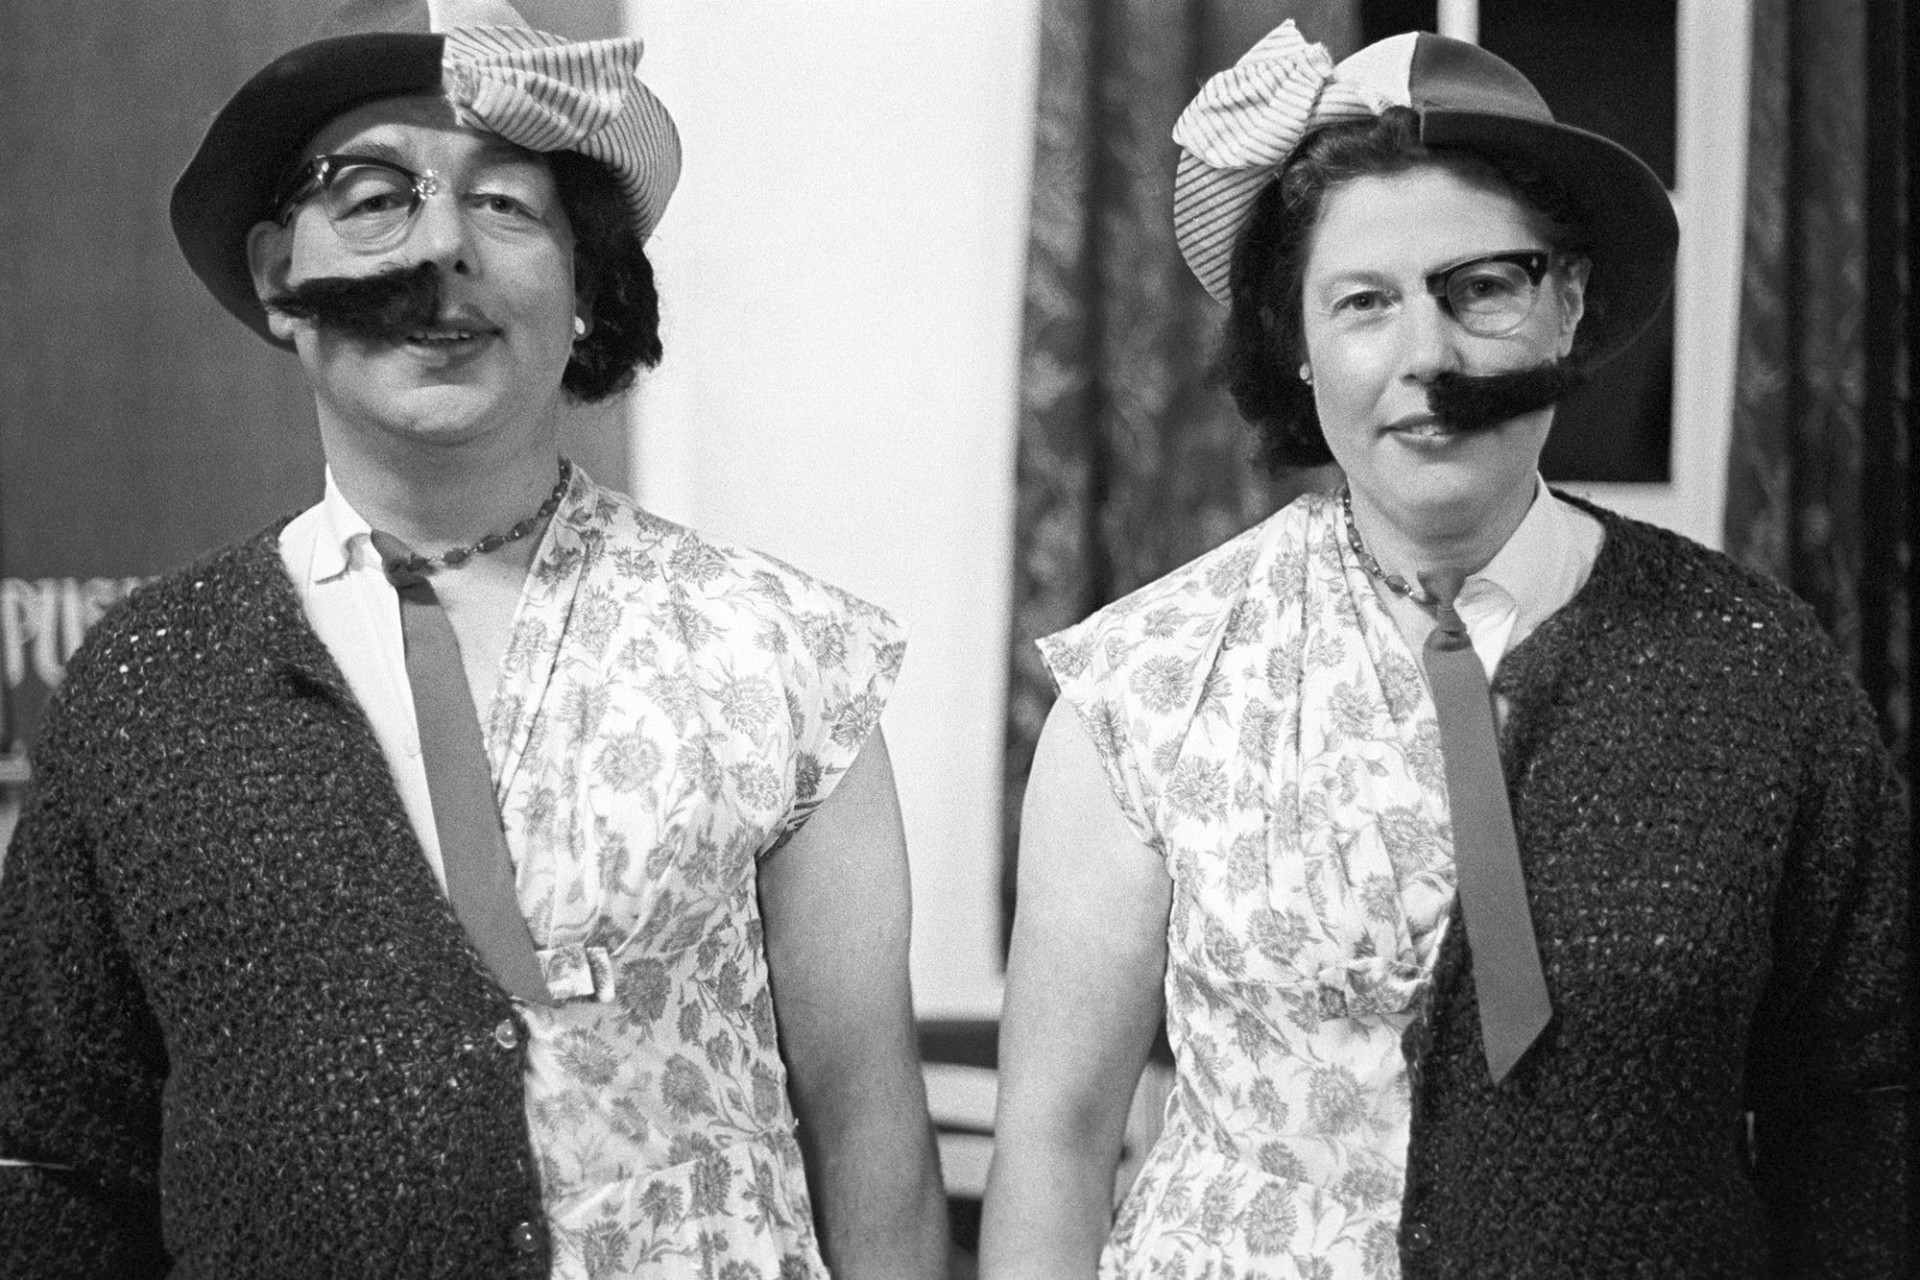 Fancy dress, couple dressed as half and half.
[Mervyn and Ethel Turner each dressed half as a man and half as a woman in Dolton Village Hall before Dolton Carnival.]